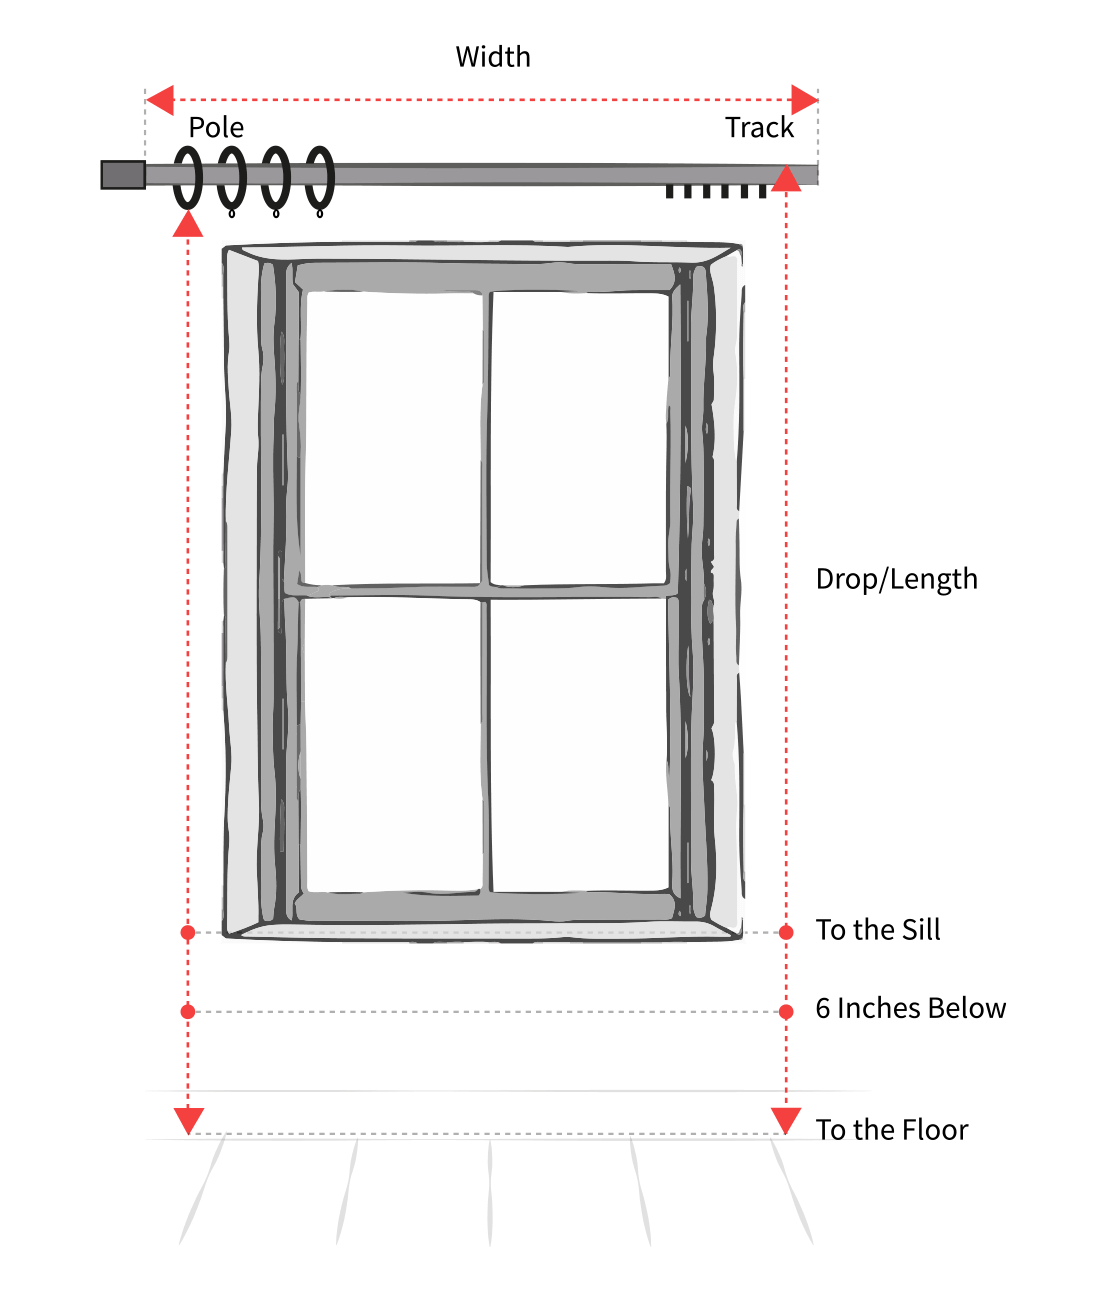 How To Measure Curtain Length Width Or, How To Tell Curtain Size